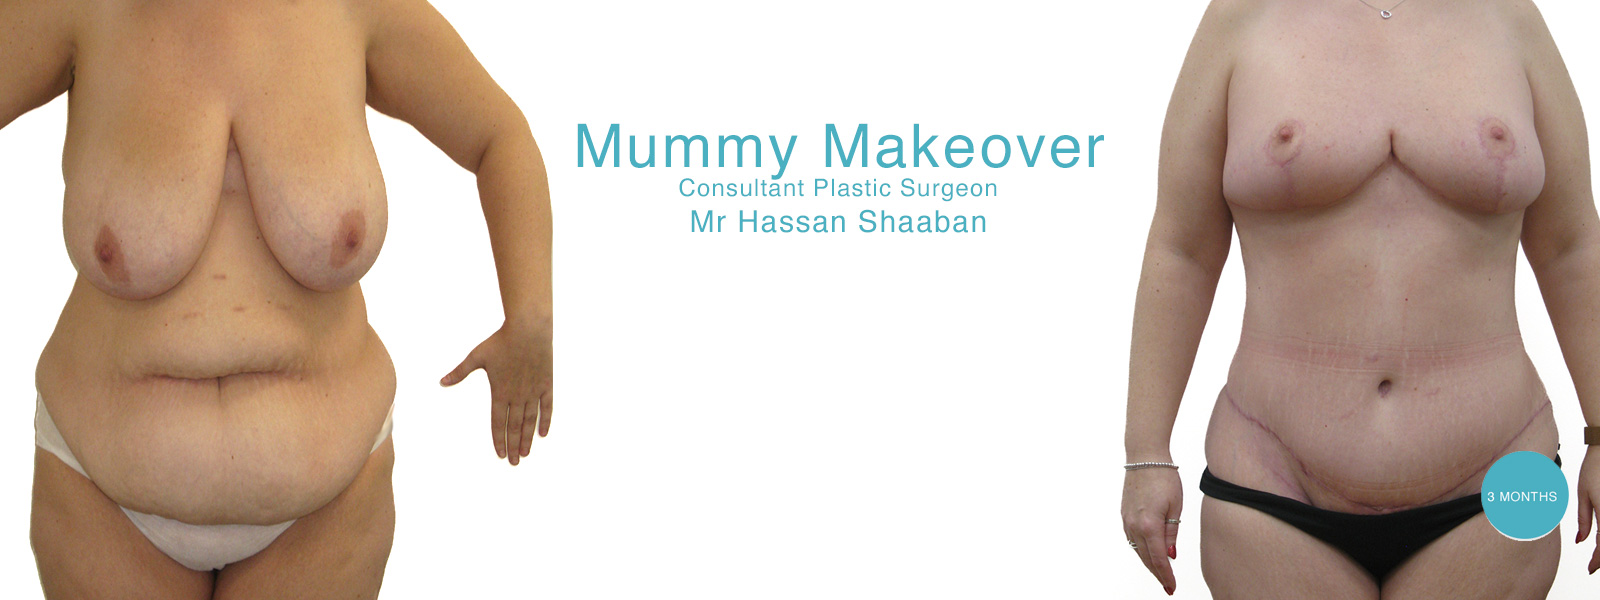 mummy makeover before and after surgery by the best mummy makover surgeon plastic surgeon Mr Hassan Shaaban